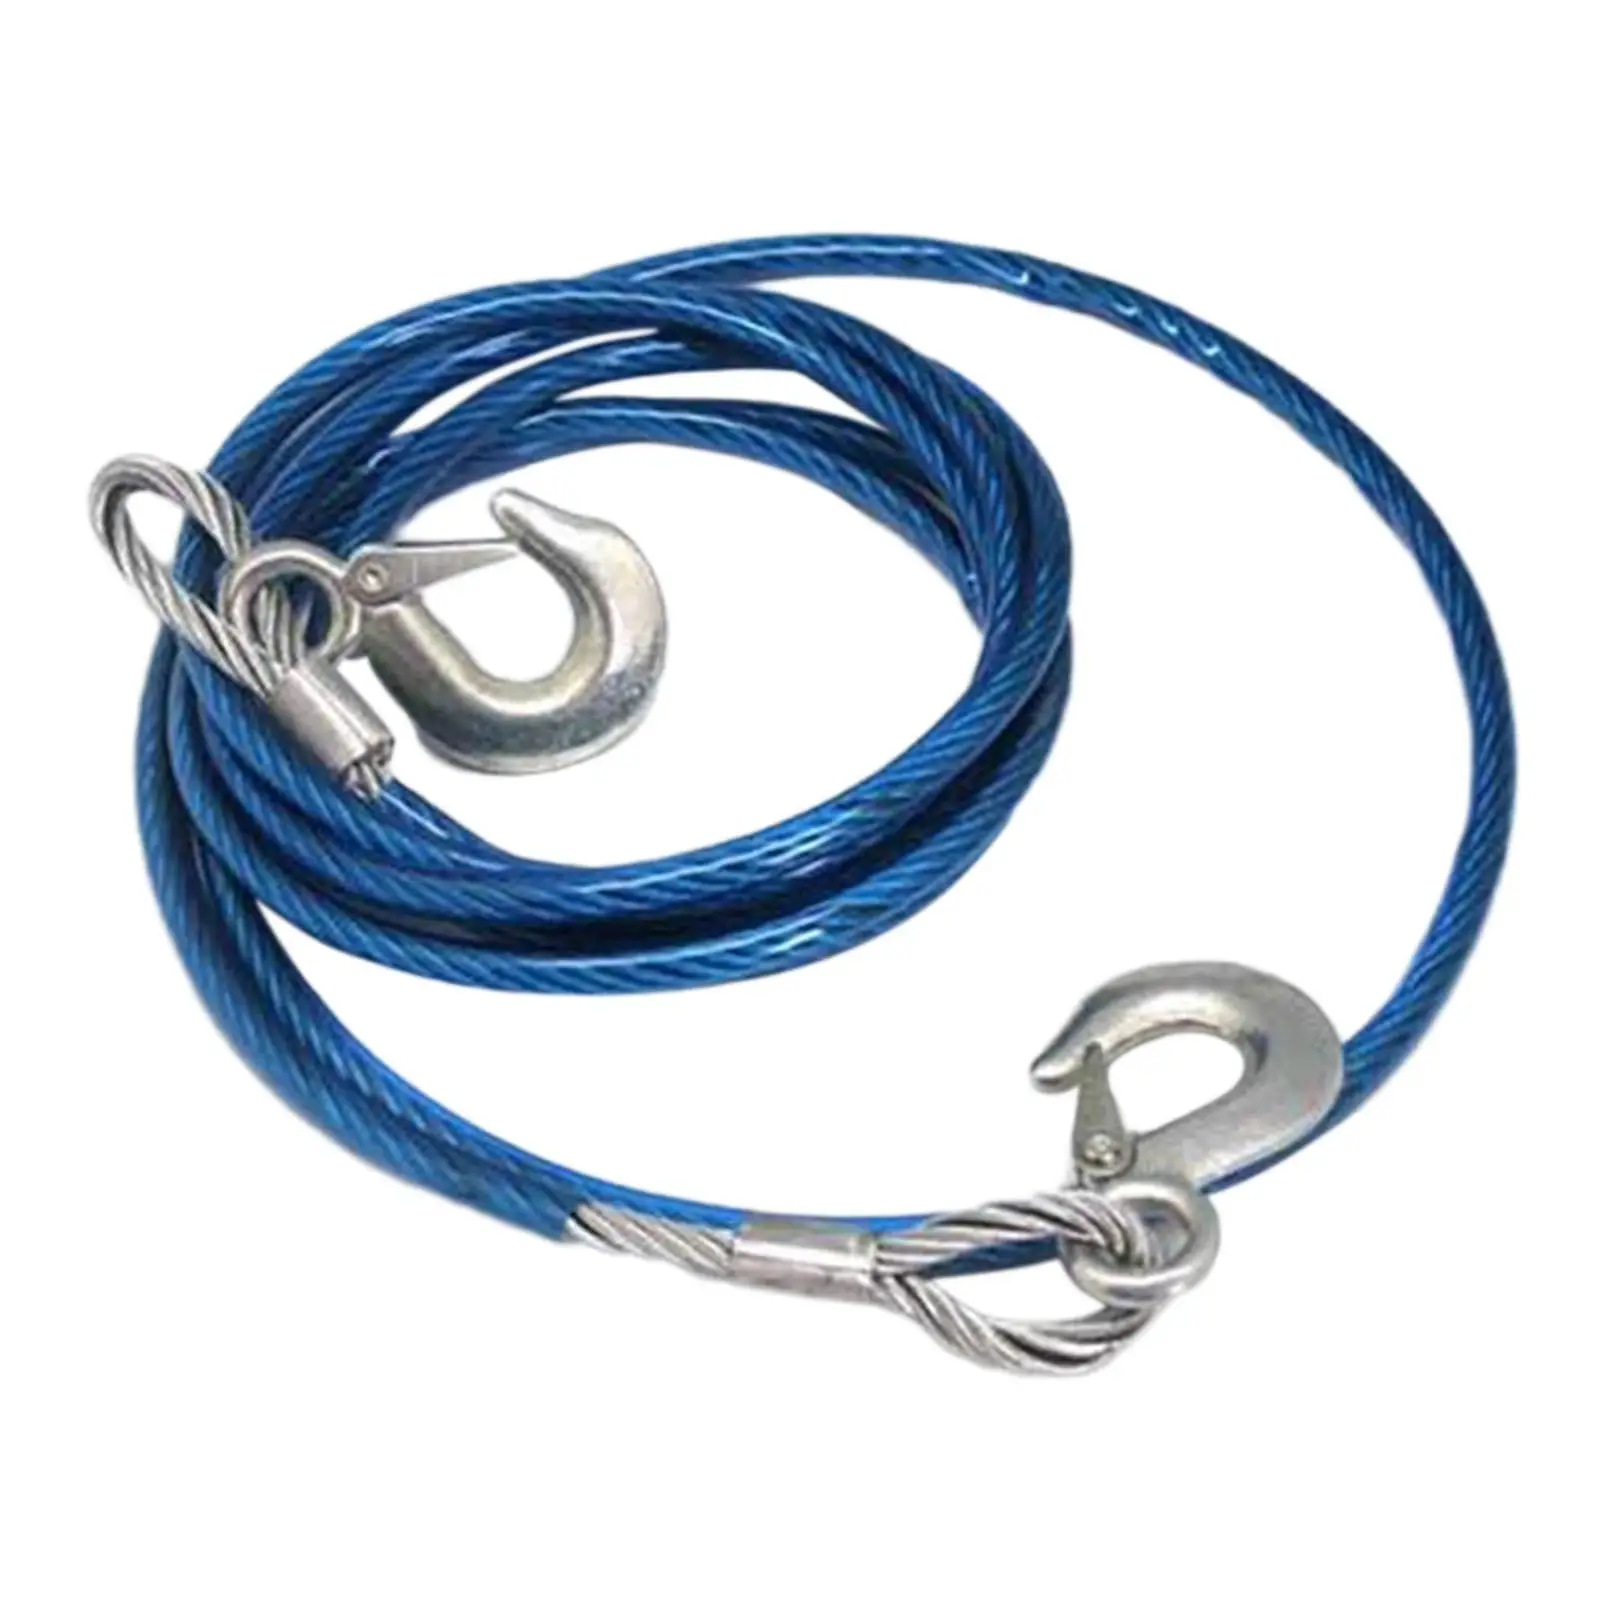 Heavy Duty Tow Strap with Safety Hooks Vehicles Tow Rope for Hauling